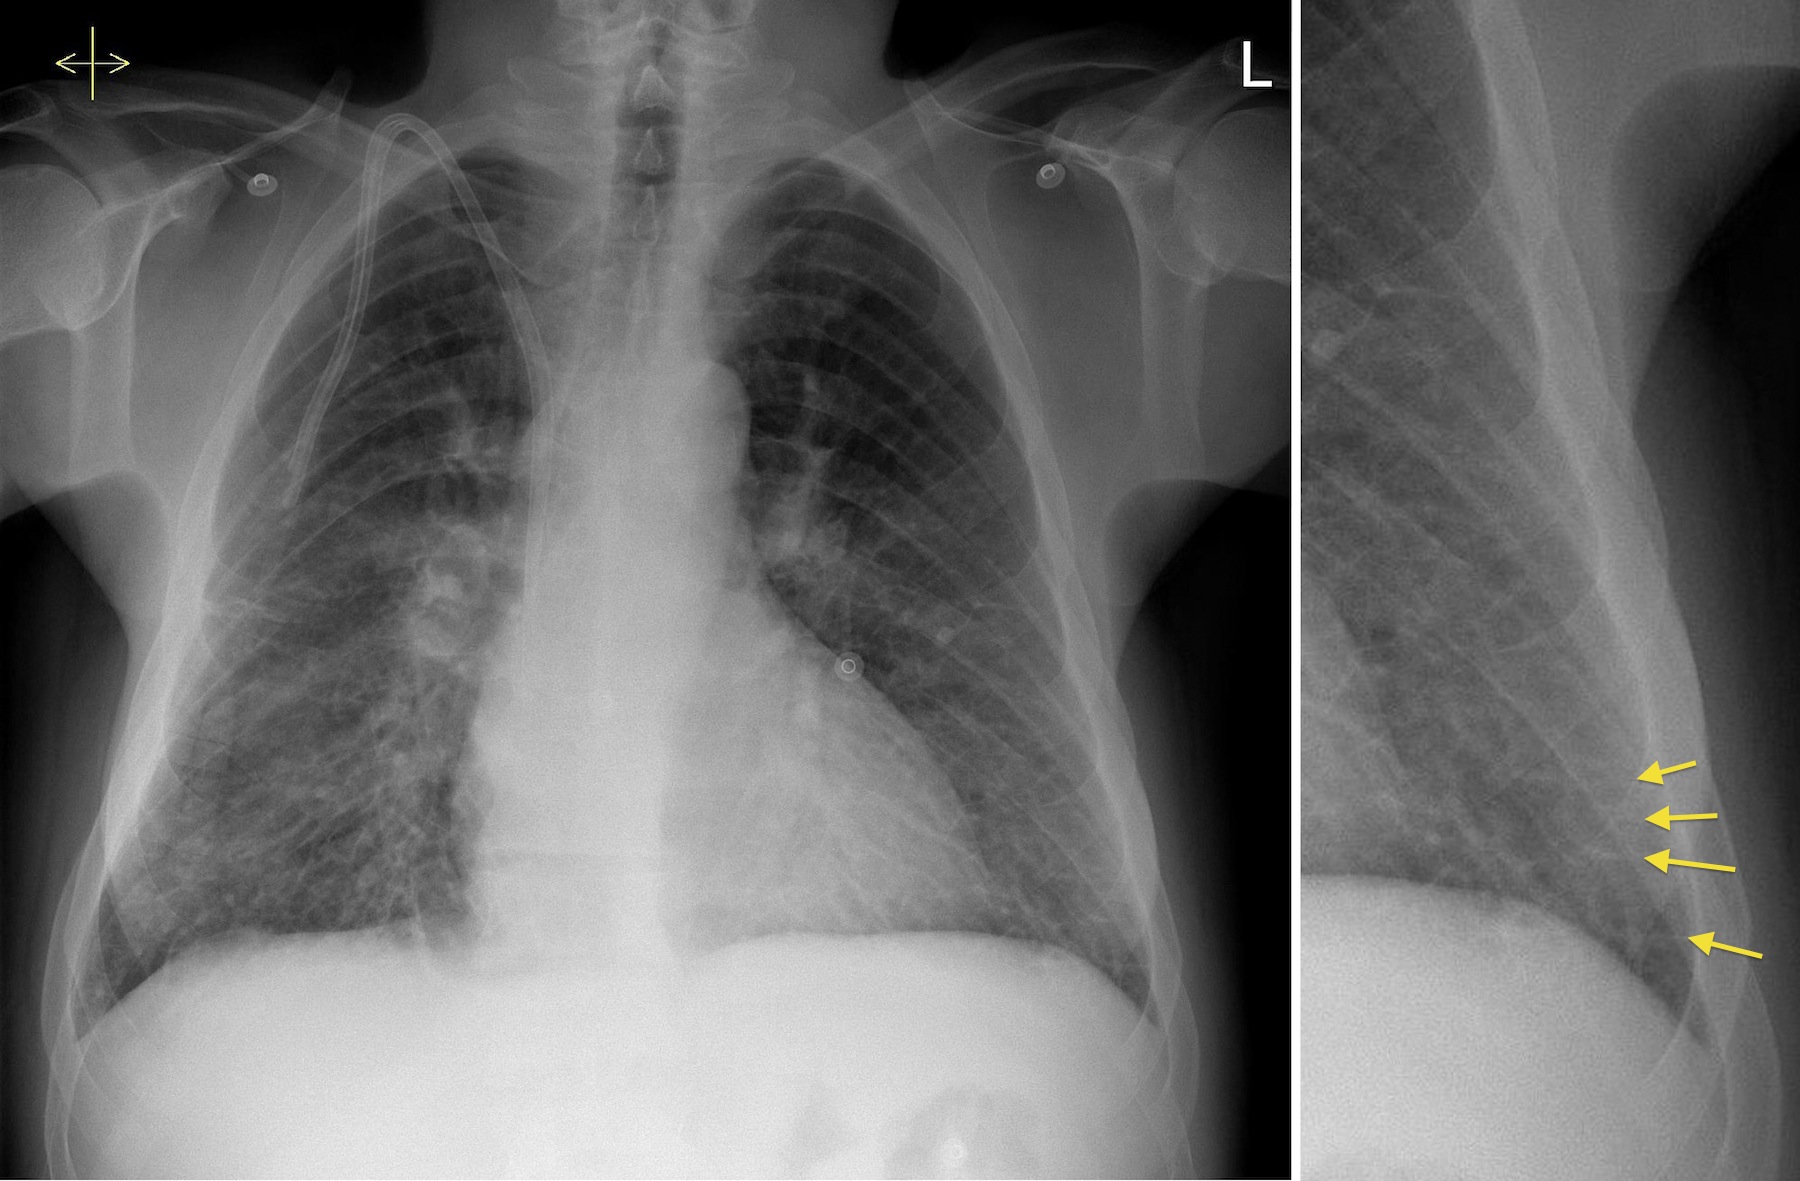 Pulmonary oedema - renal failure - Radiology at St. Vincent's